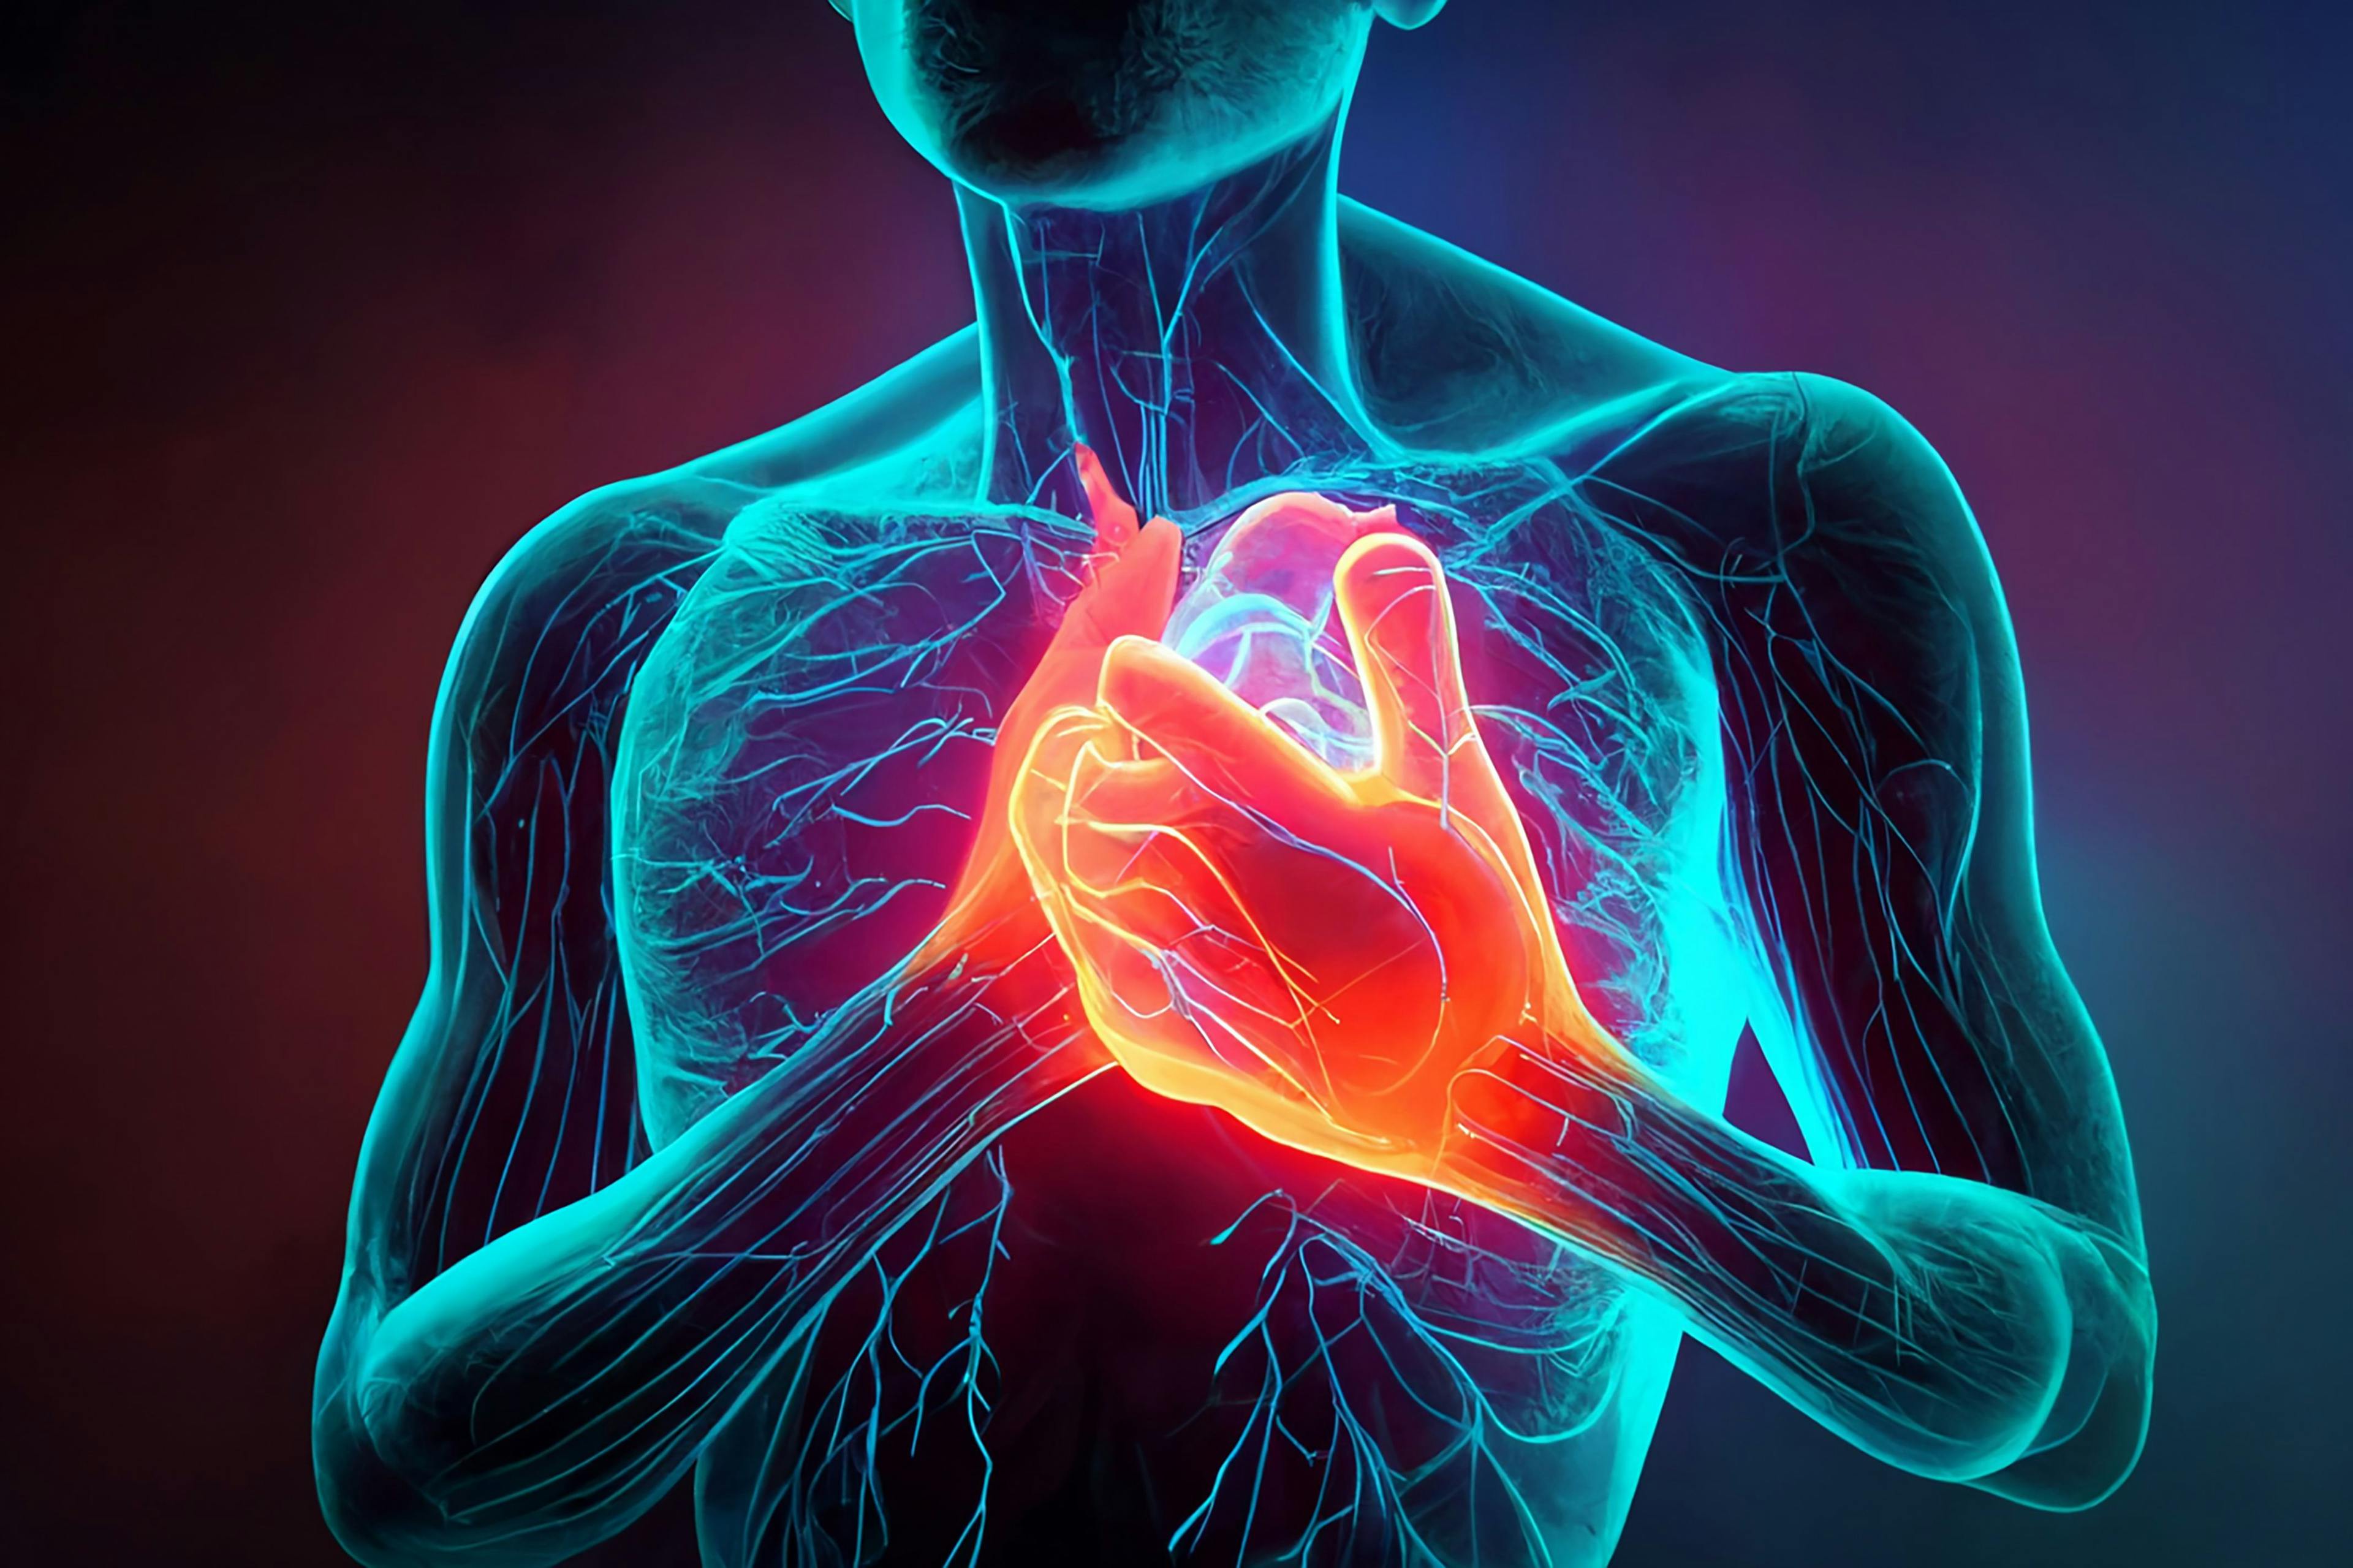 Pain in the heart, a person is holding on to the heart in his chest| Image credit: Vadi Fuoco- stock.adobe.com 